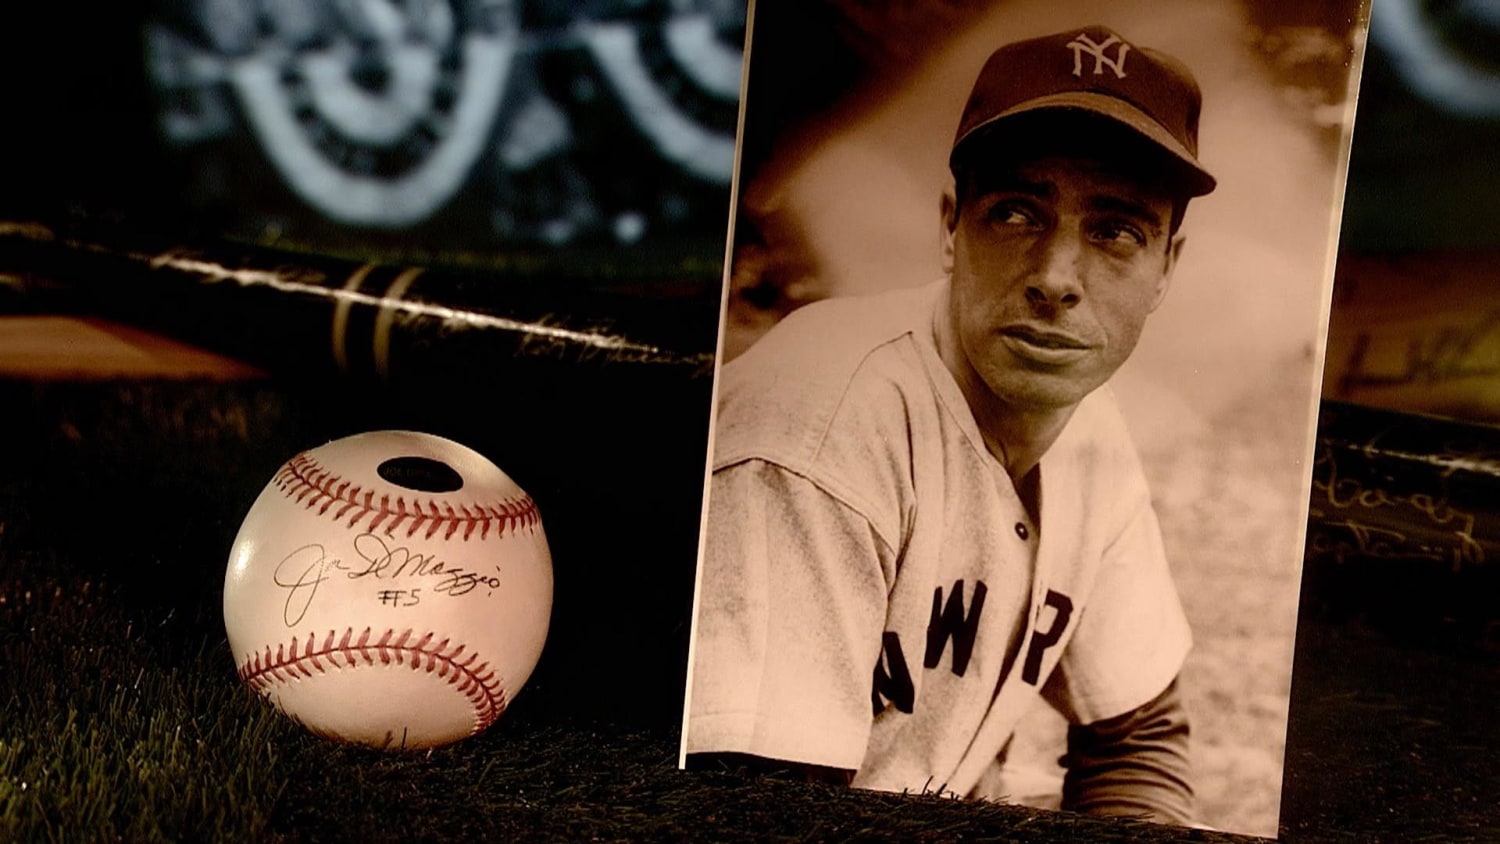 Here's Who Inherited Joe DiMaggio's Money After He Died